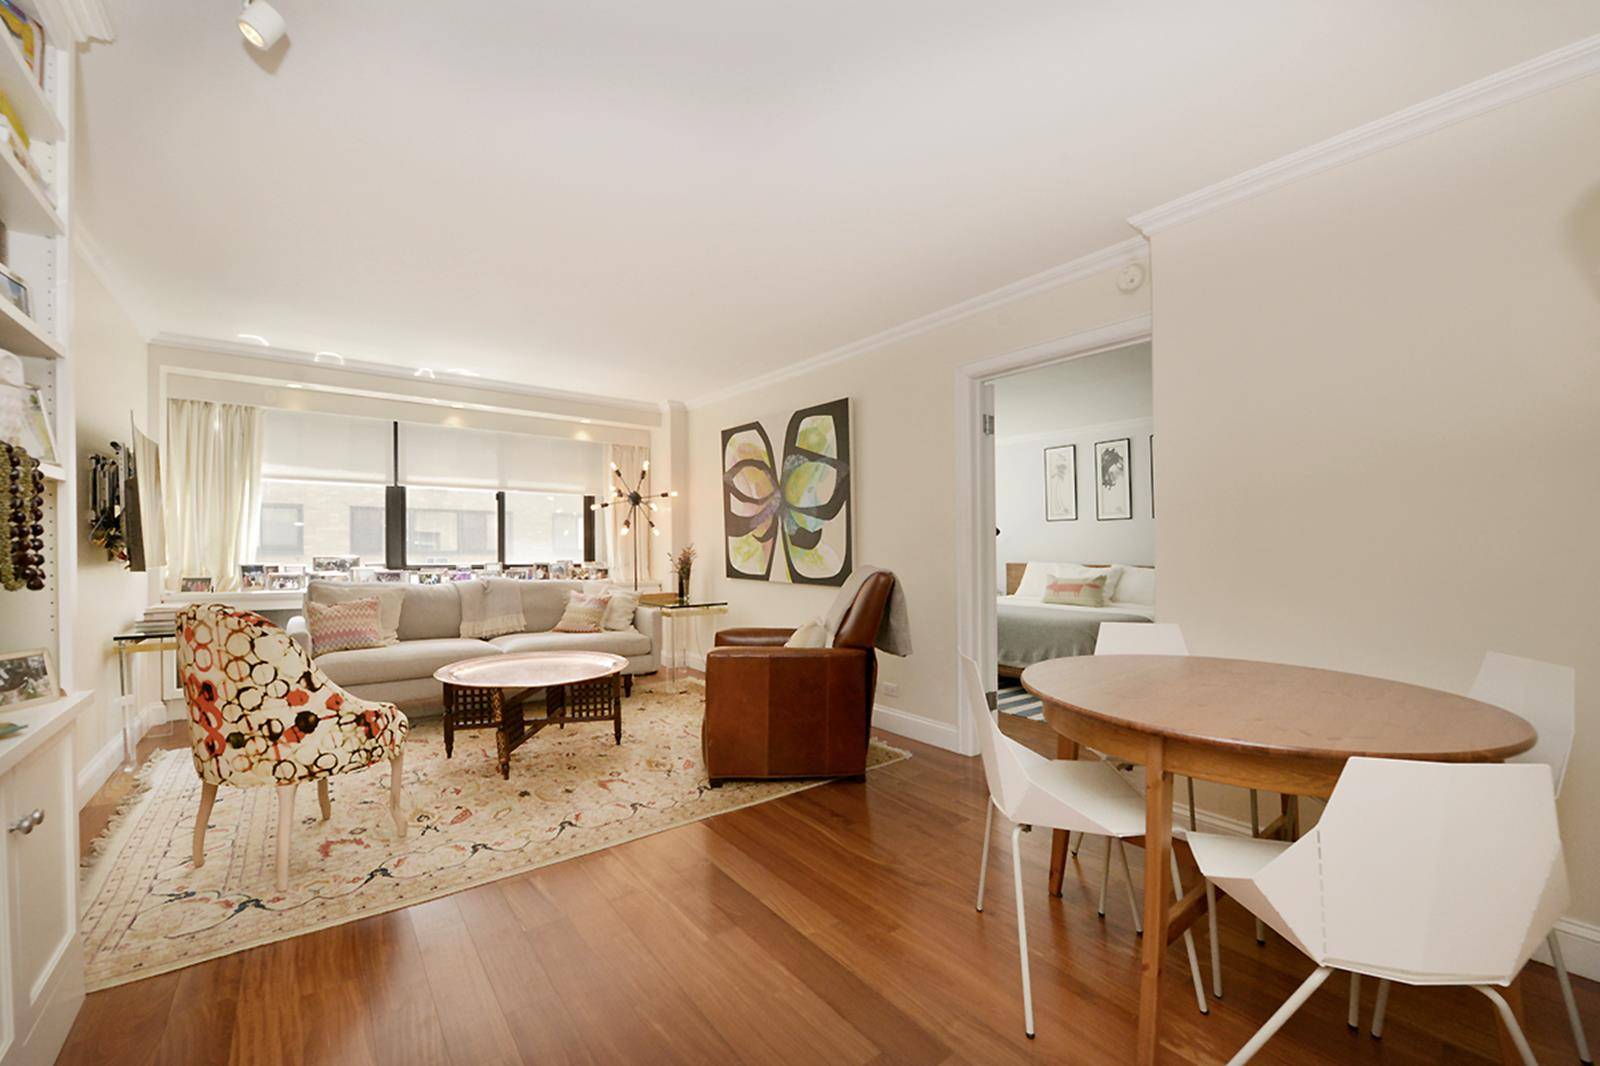 No detail has been overlooked in this meticulously renovated two bedroom, two bathroom on a high floor in The Chelsea Lane.